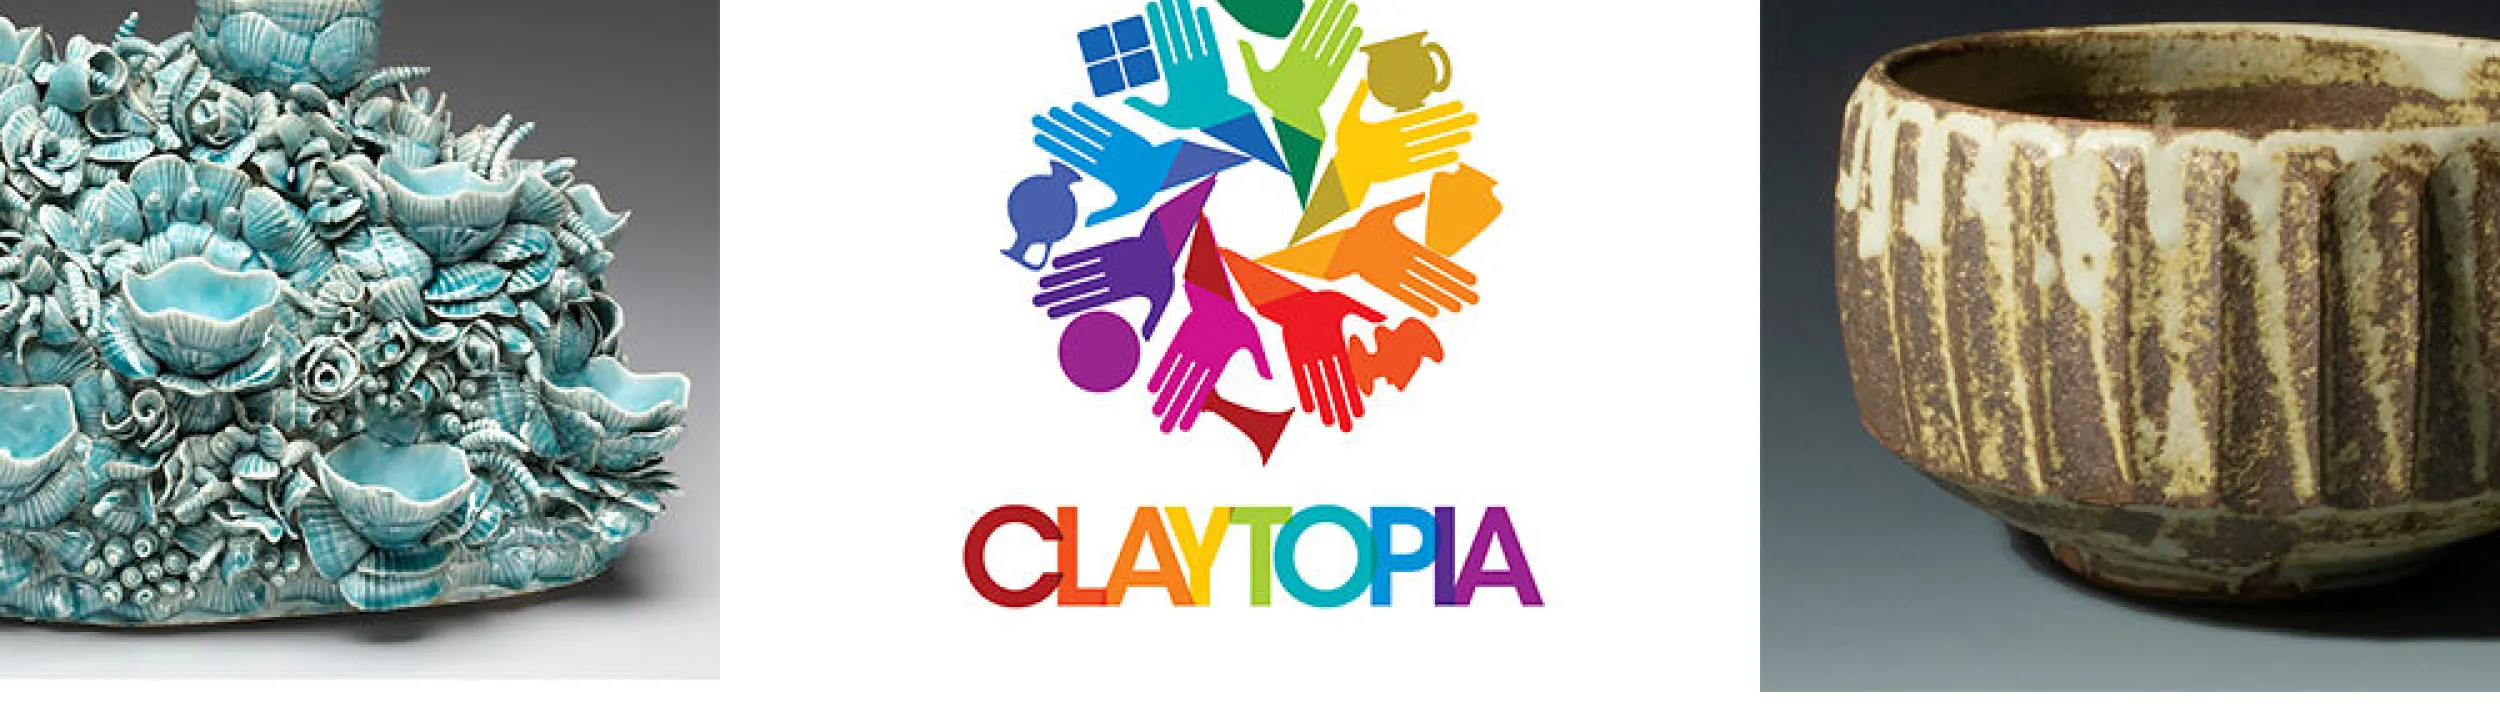 Colorful logo for Claytopia with examples of ceramic artwork on either side